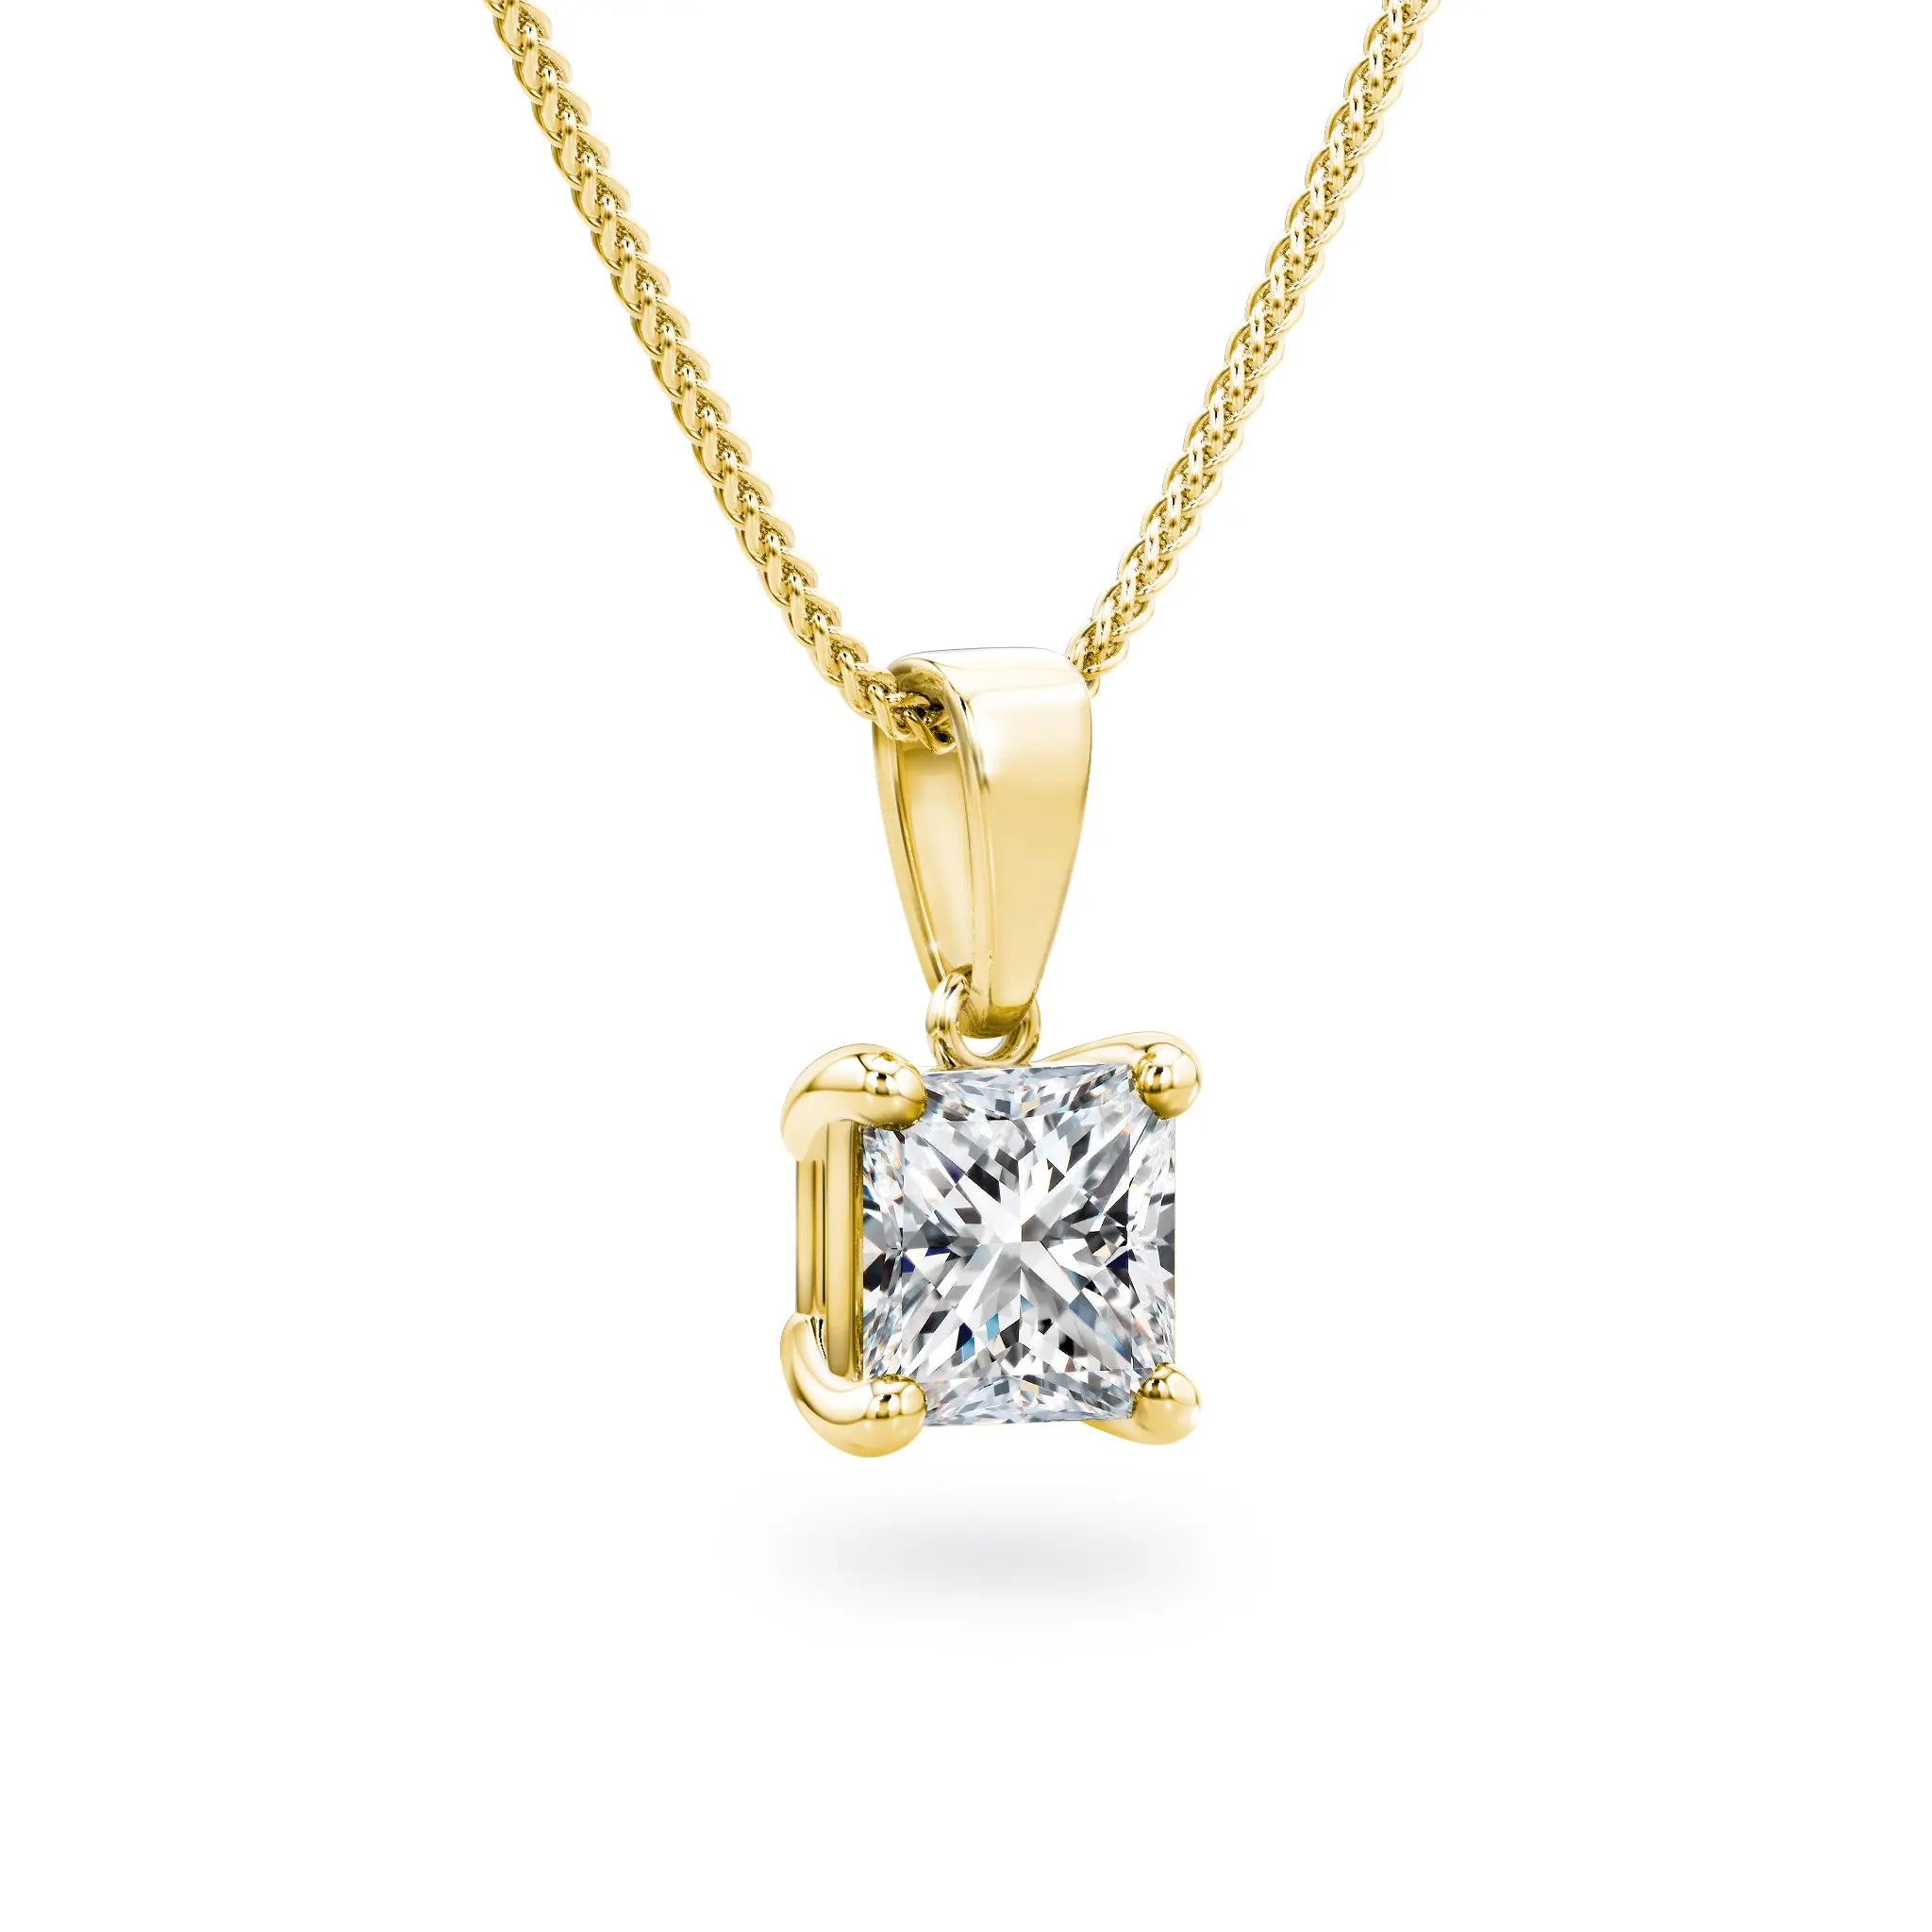 Shimansky - My Girl Solitaire Diamond Pendant 0.70ct Crafted in 18K Yellow Gold